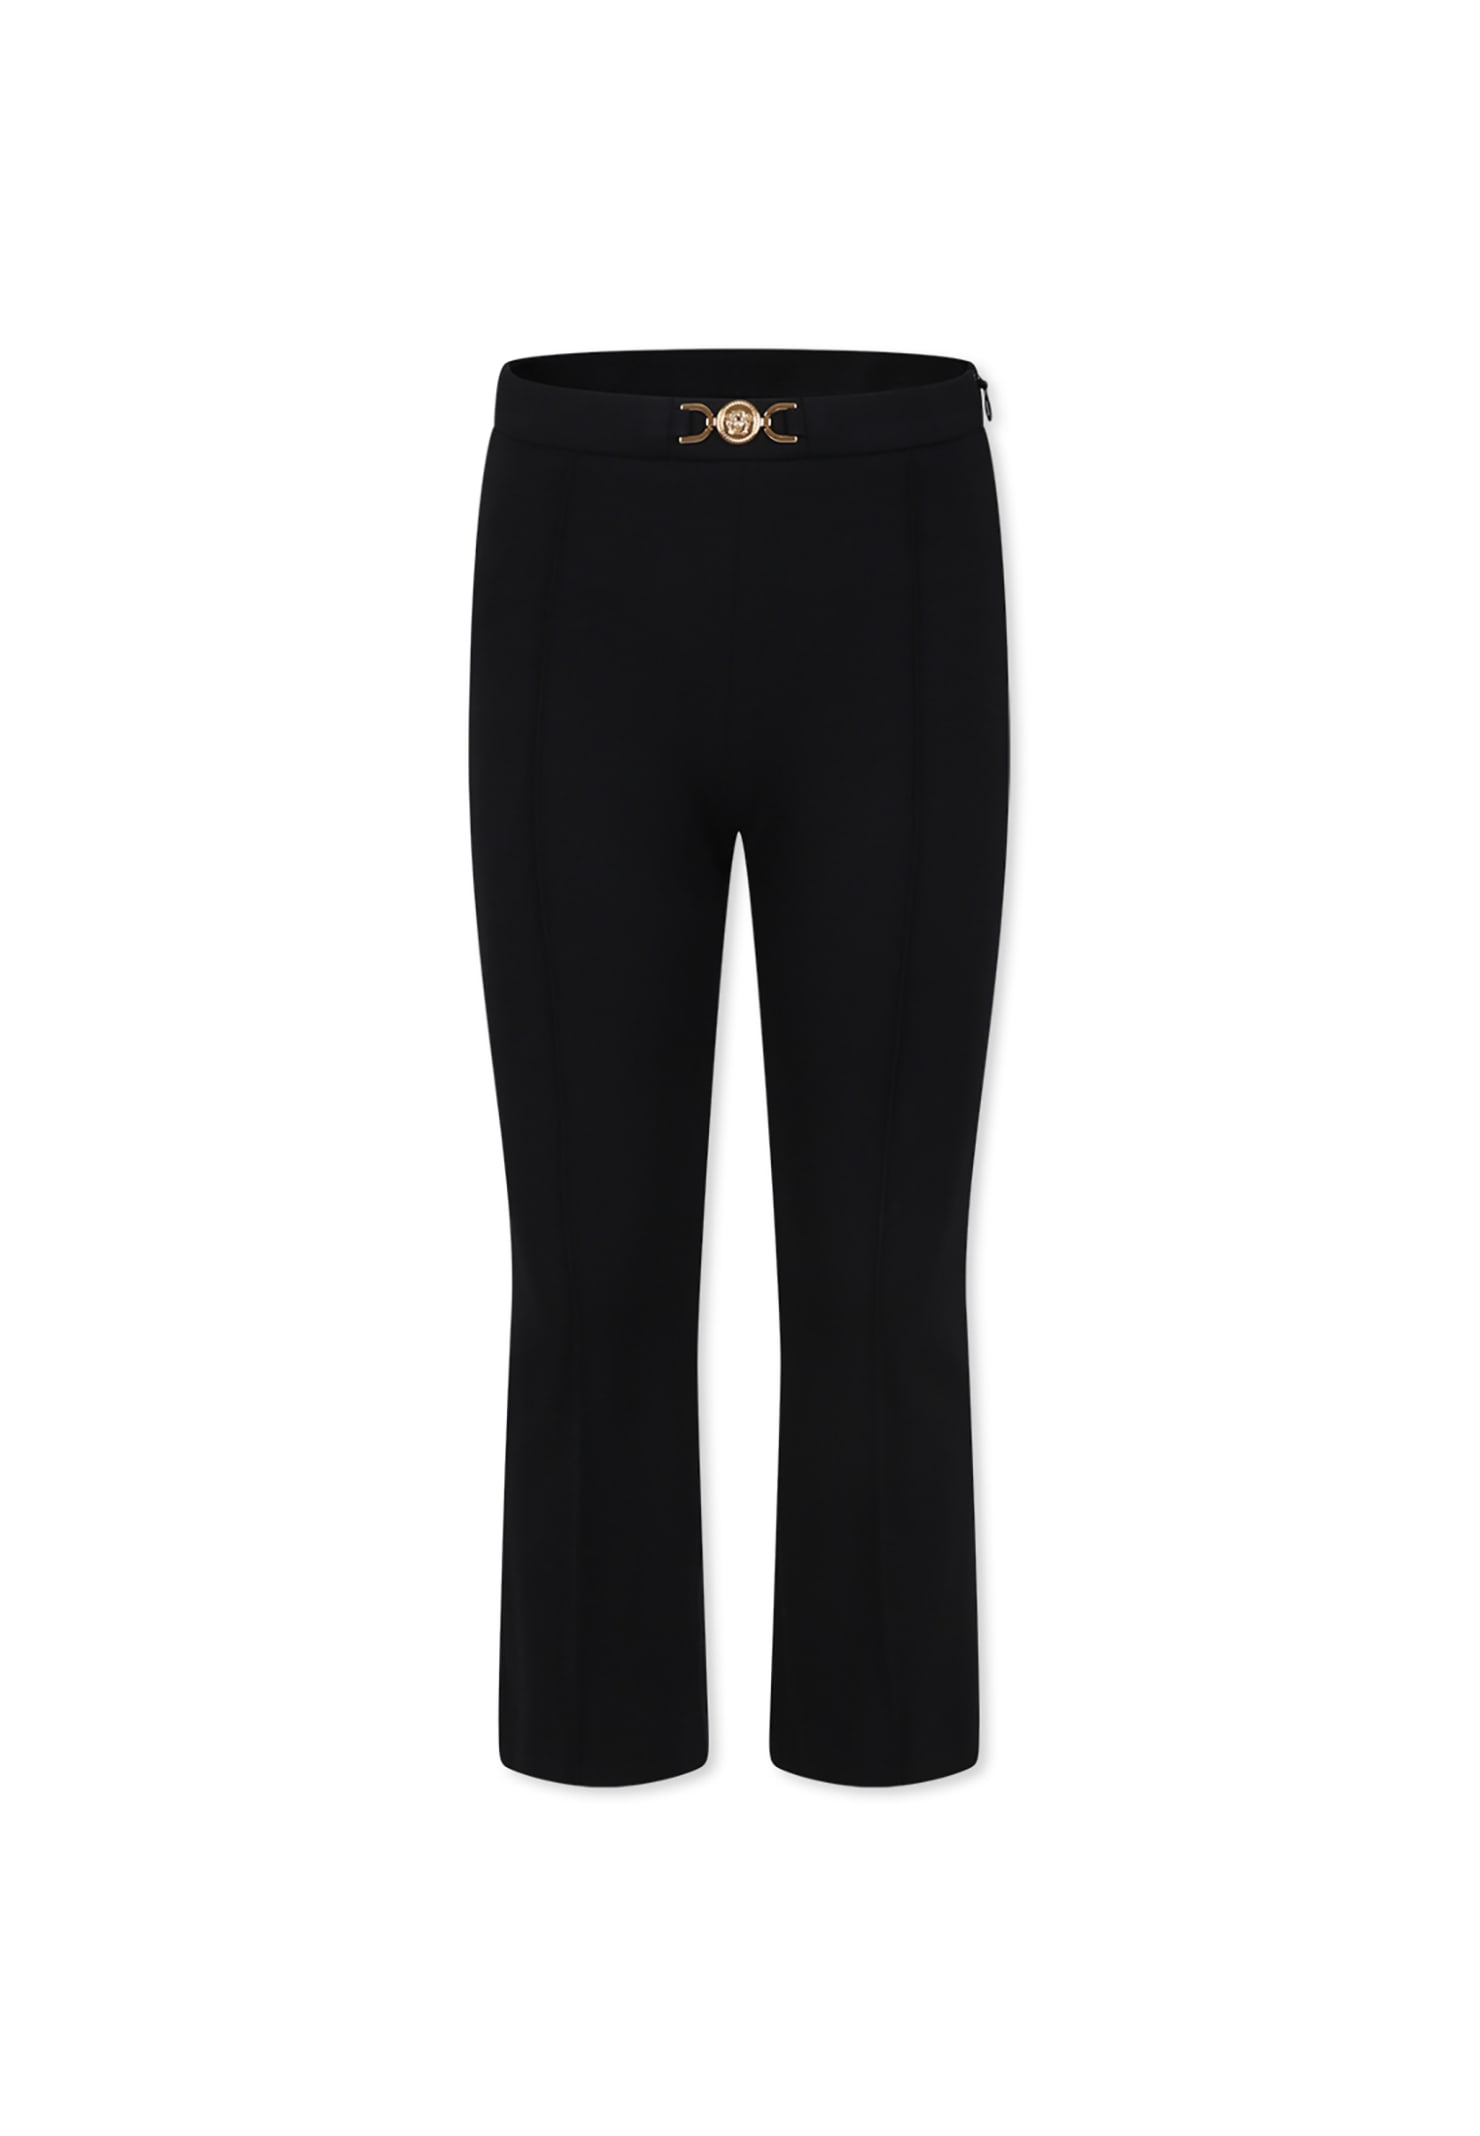 Versace Kids' Black Trousers For Girl With Medusa